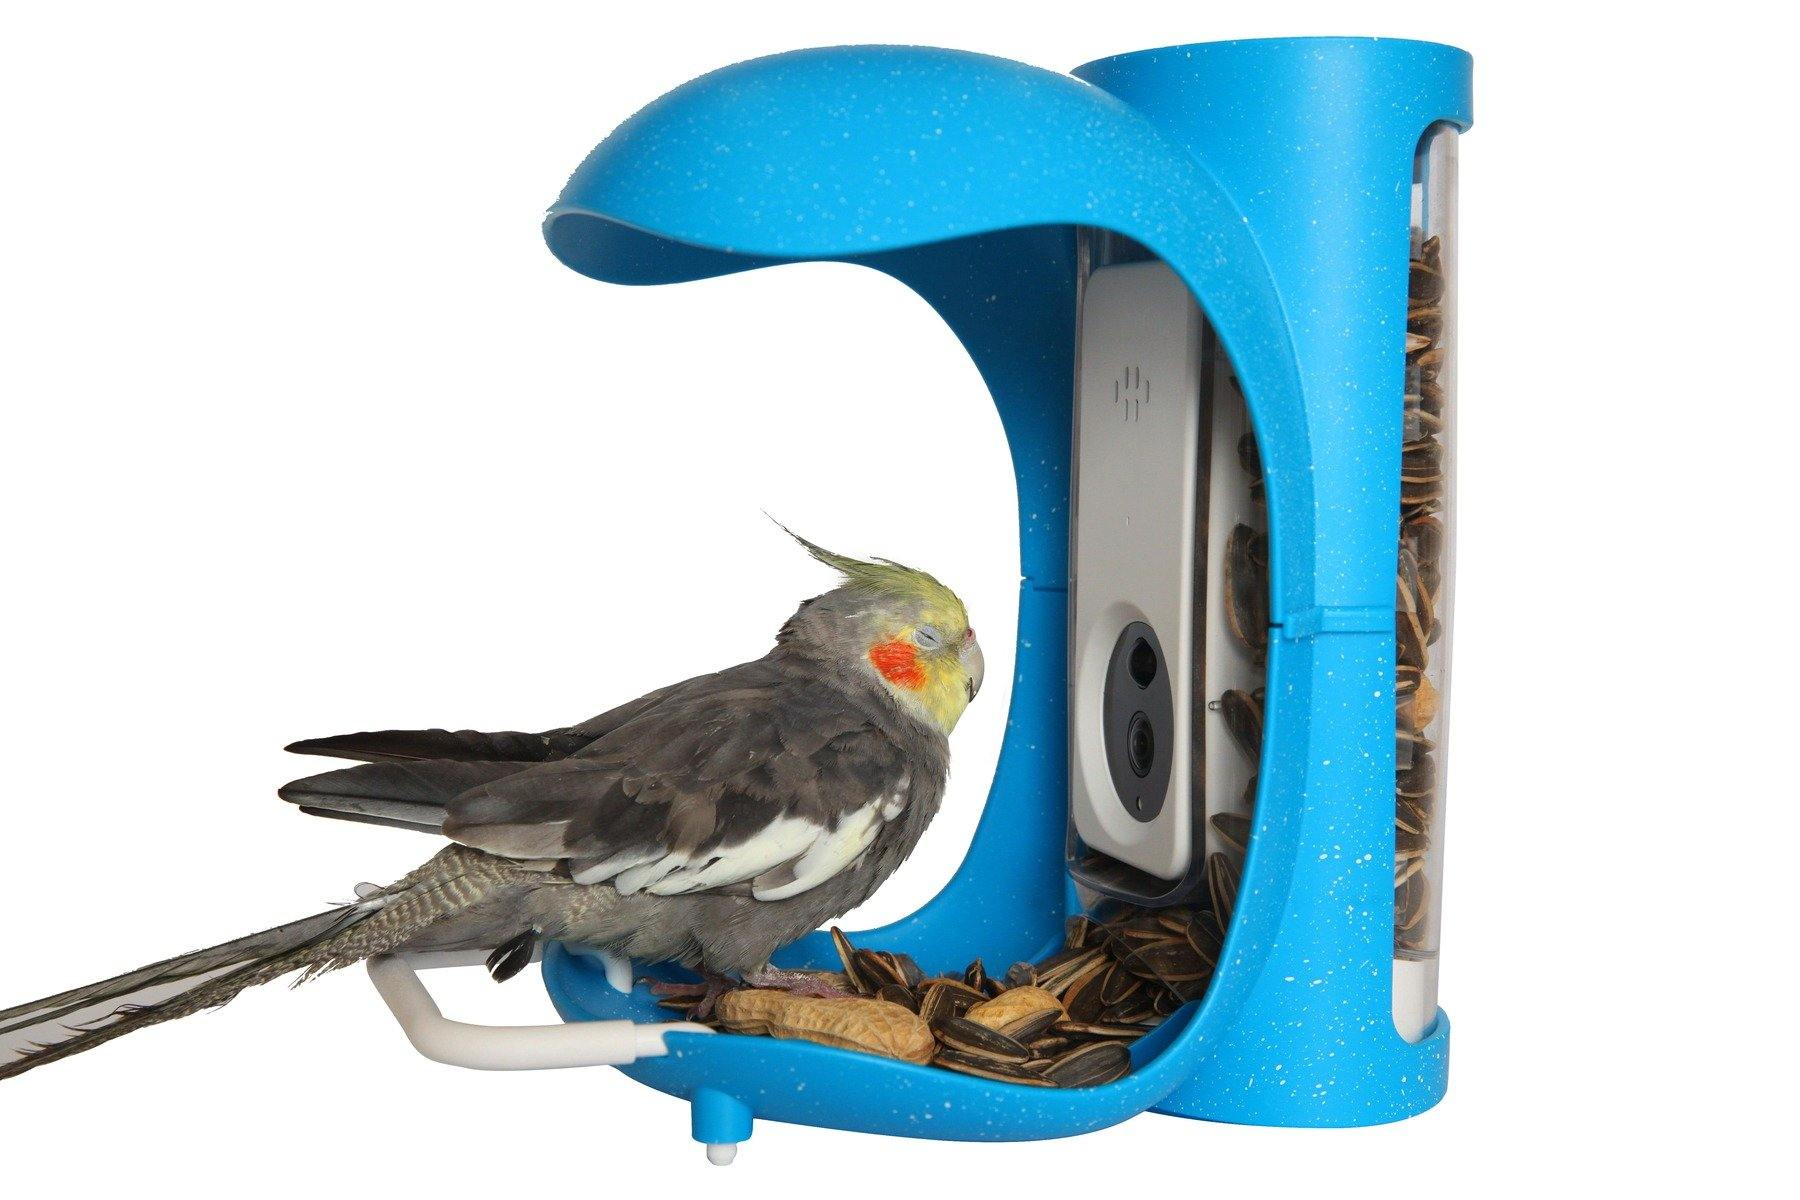 Why is it a smart bird feeder? - PalProt